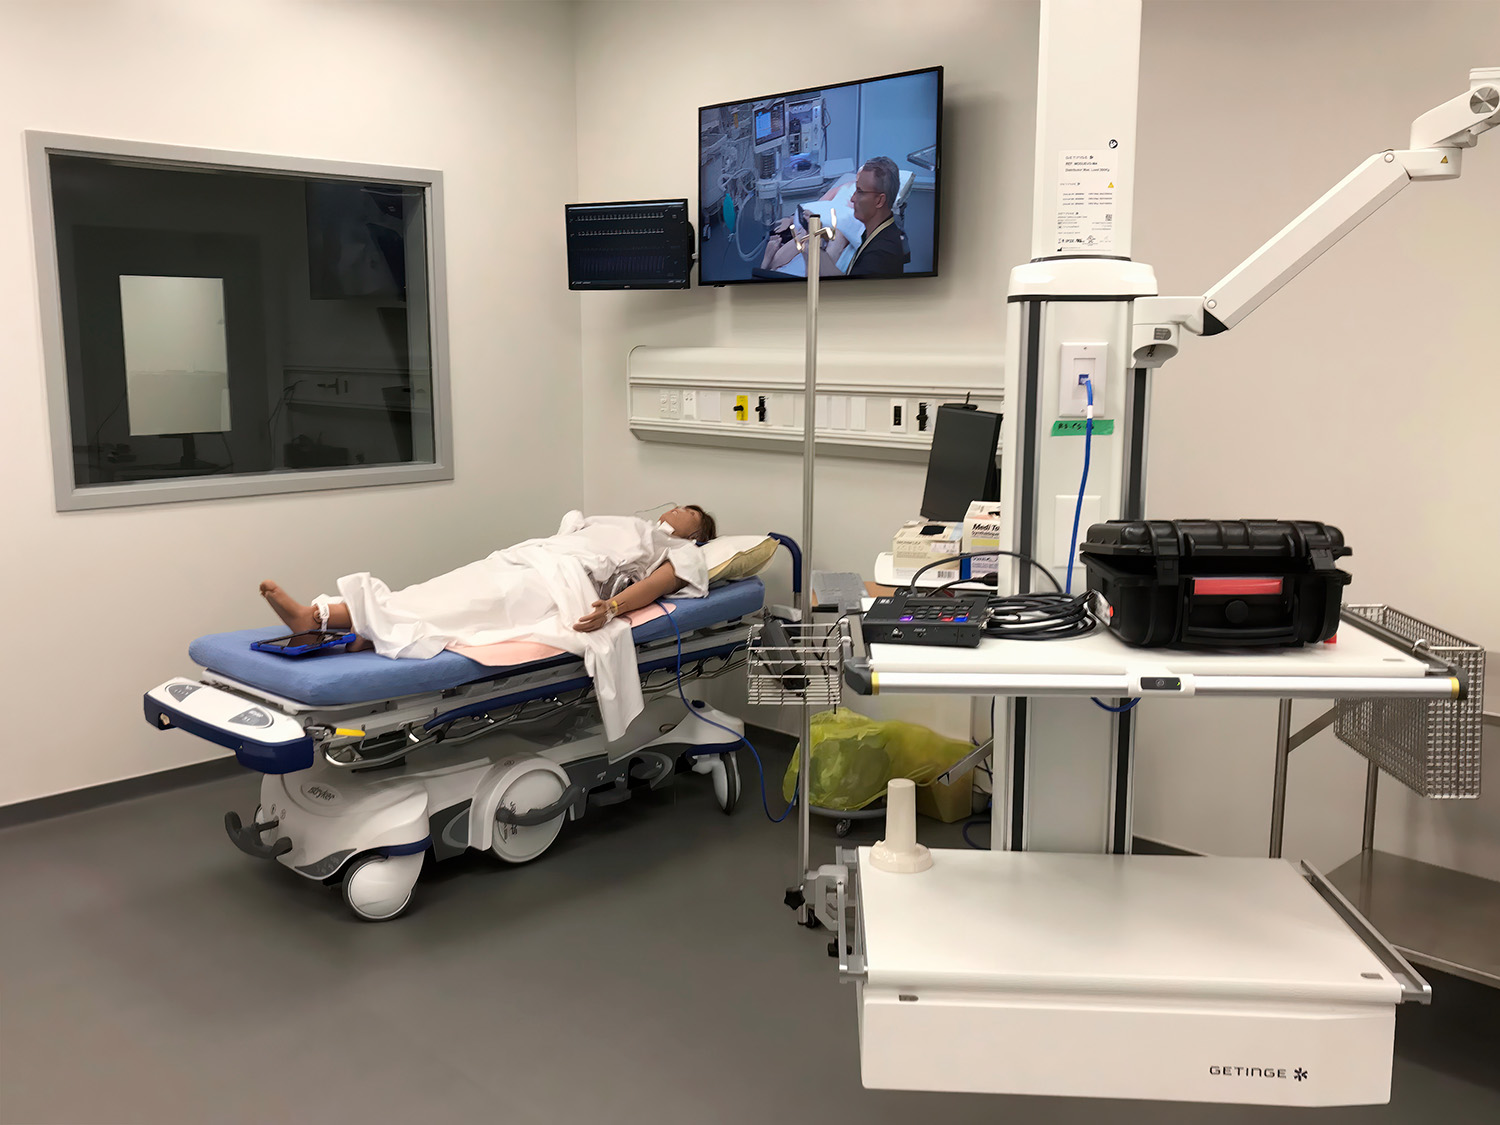 Bed stations are designed to allow students and the instructor to gather without restricting access to the patient simulator.